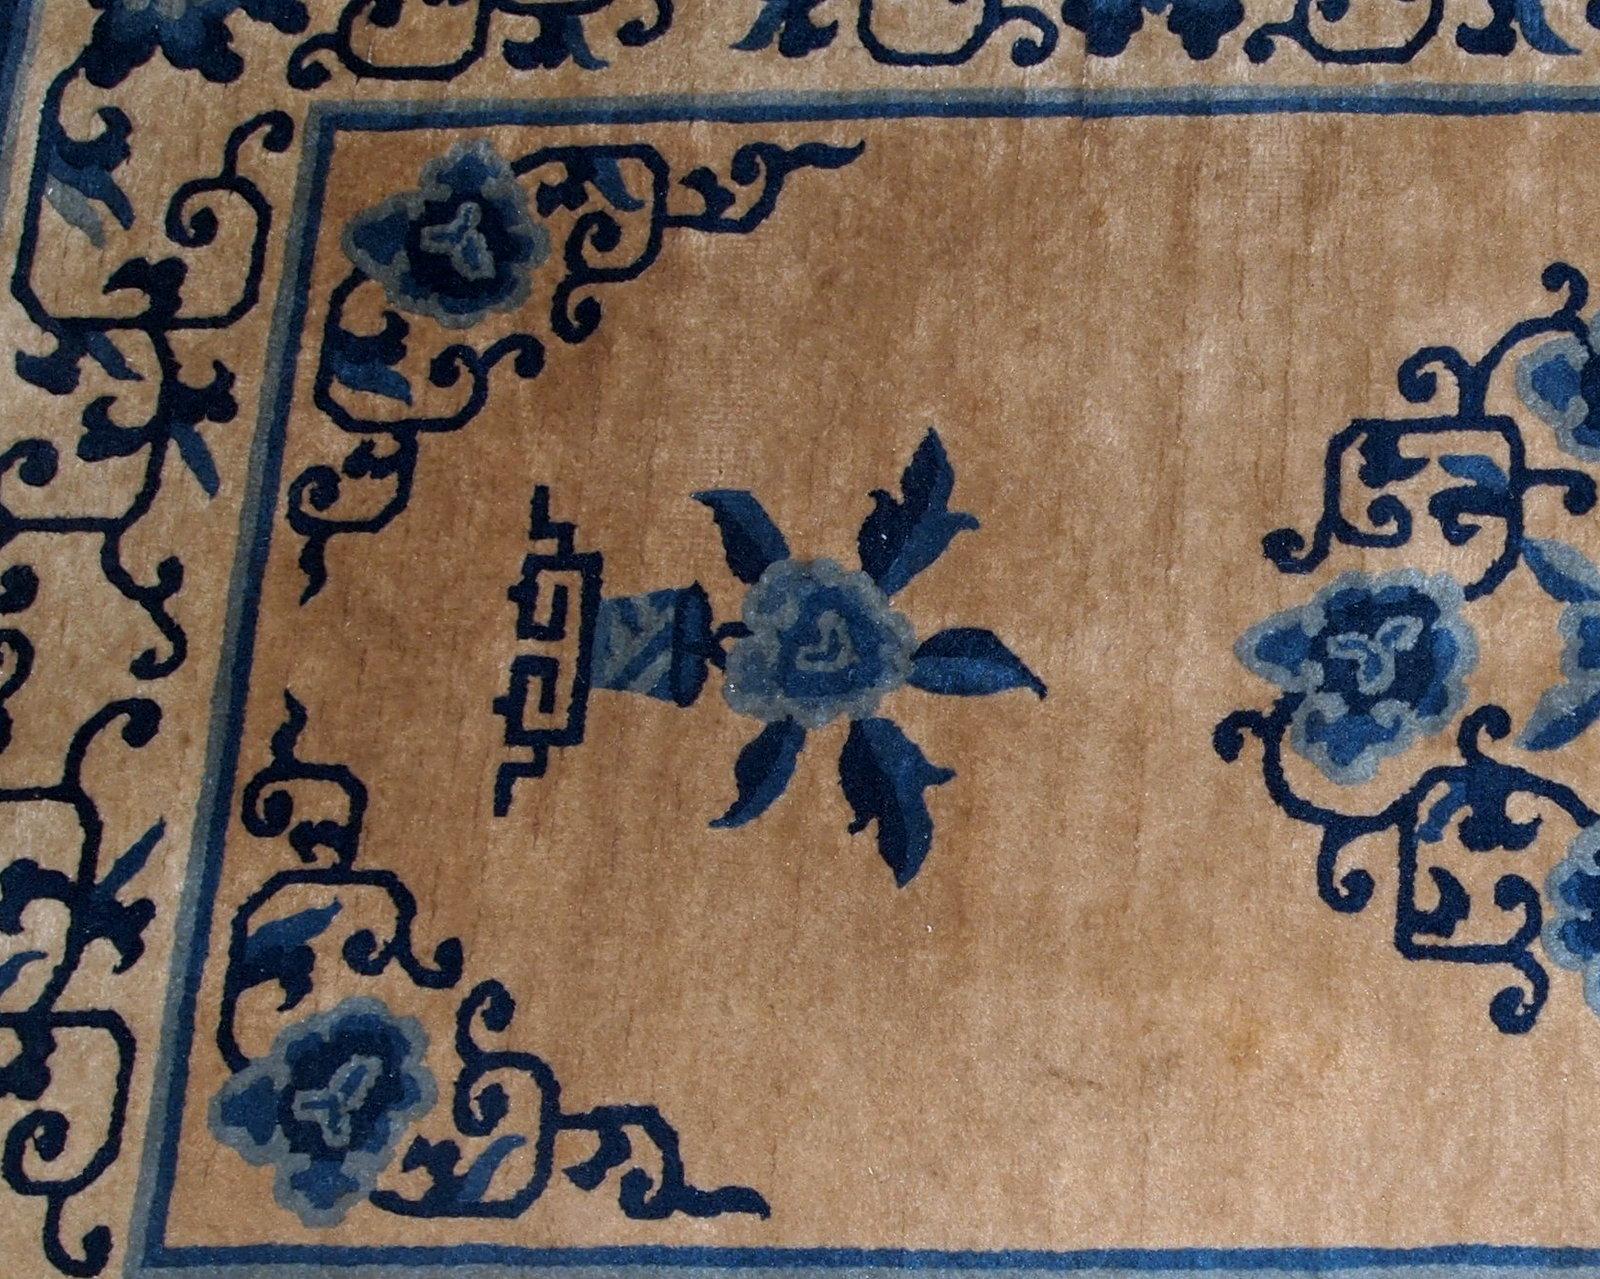 Handmade antique Peking Chinese rug in blue and beige wool. The rug is in original good condition, from the beginning of 20th century.

- Condition: original good,

- circa 1940s,

- Size: 3.1' x 5.3' (94cm x 161cm),

- Material: wool,

-